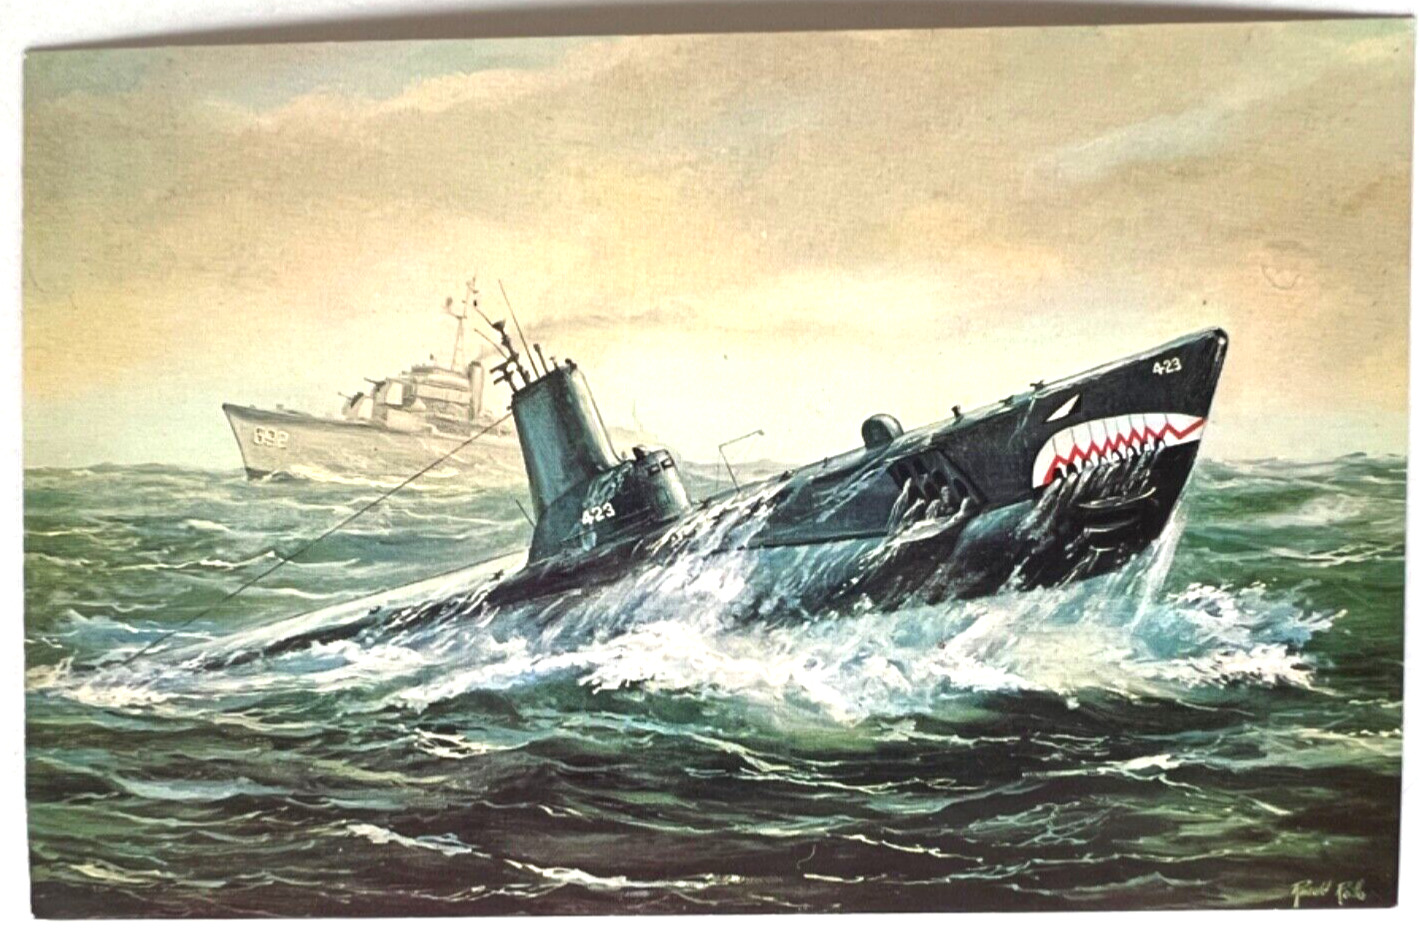 c1967 Postcard Painting of U.S.S. Torsk Naval Submarine Active in WWll A10